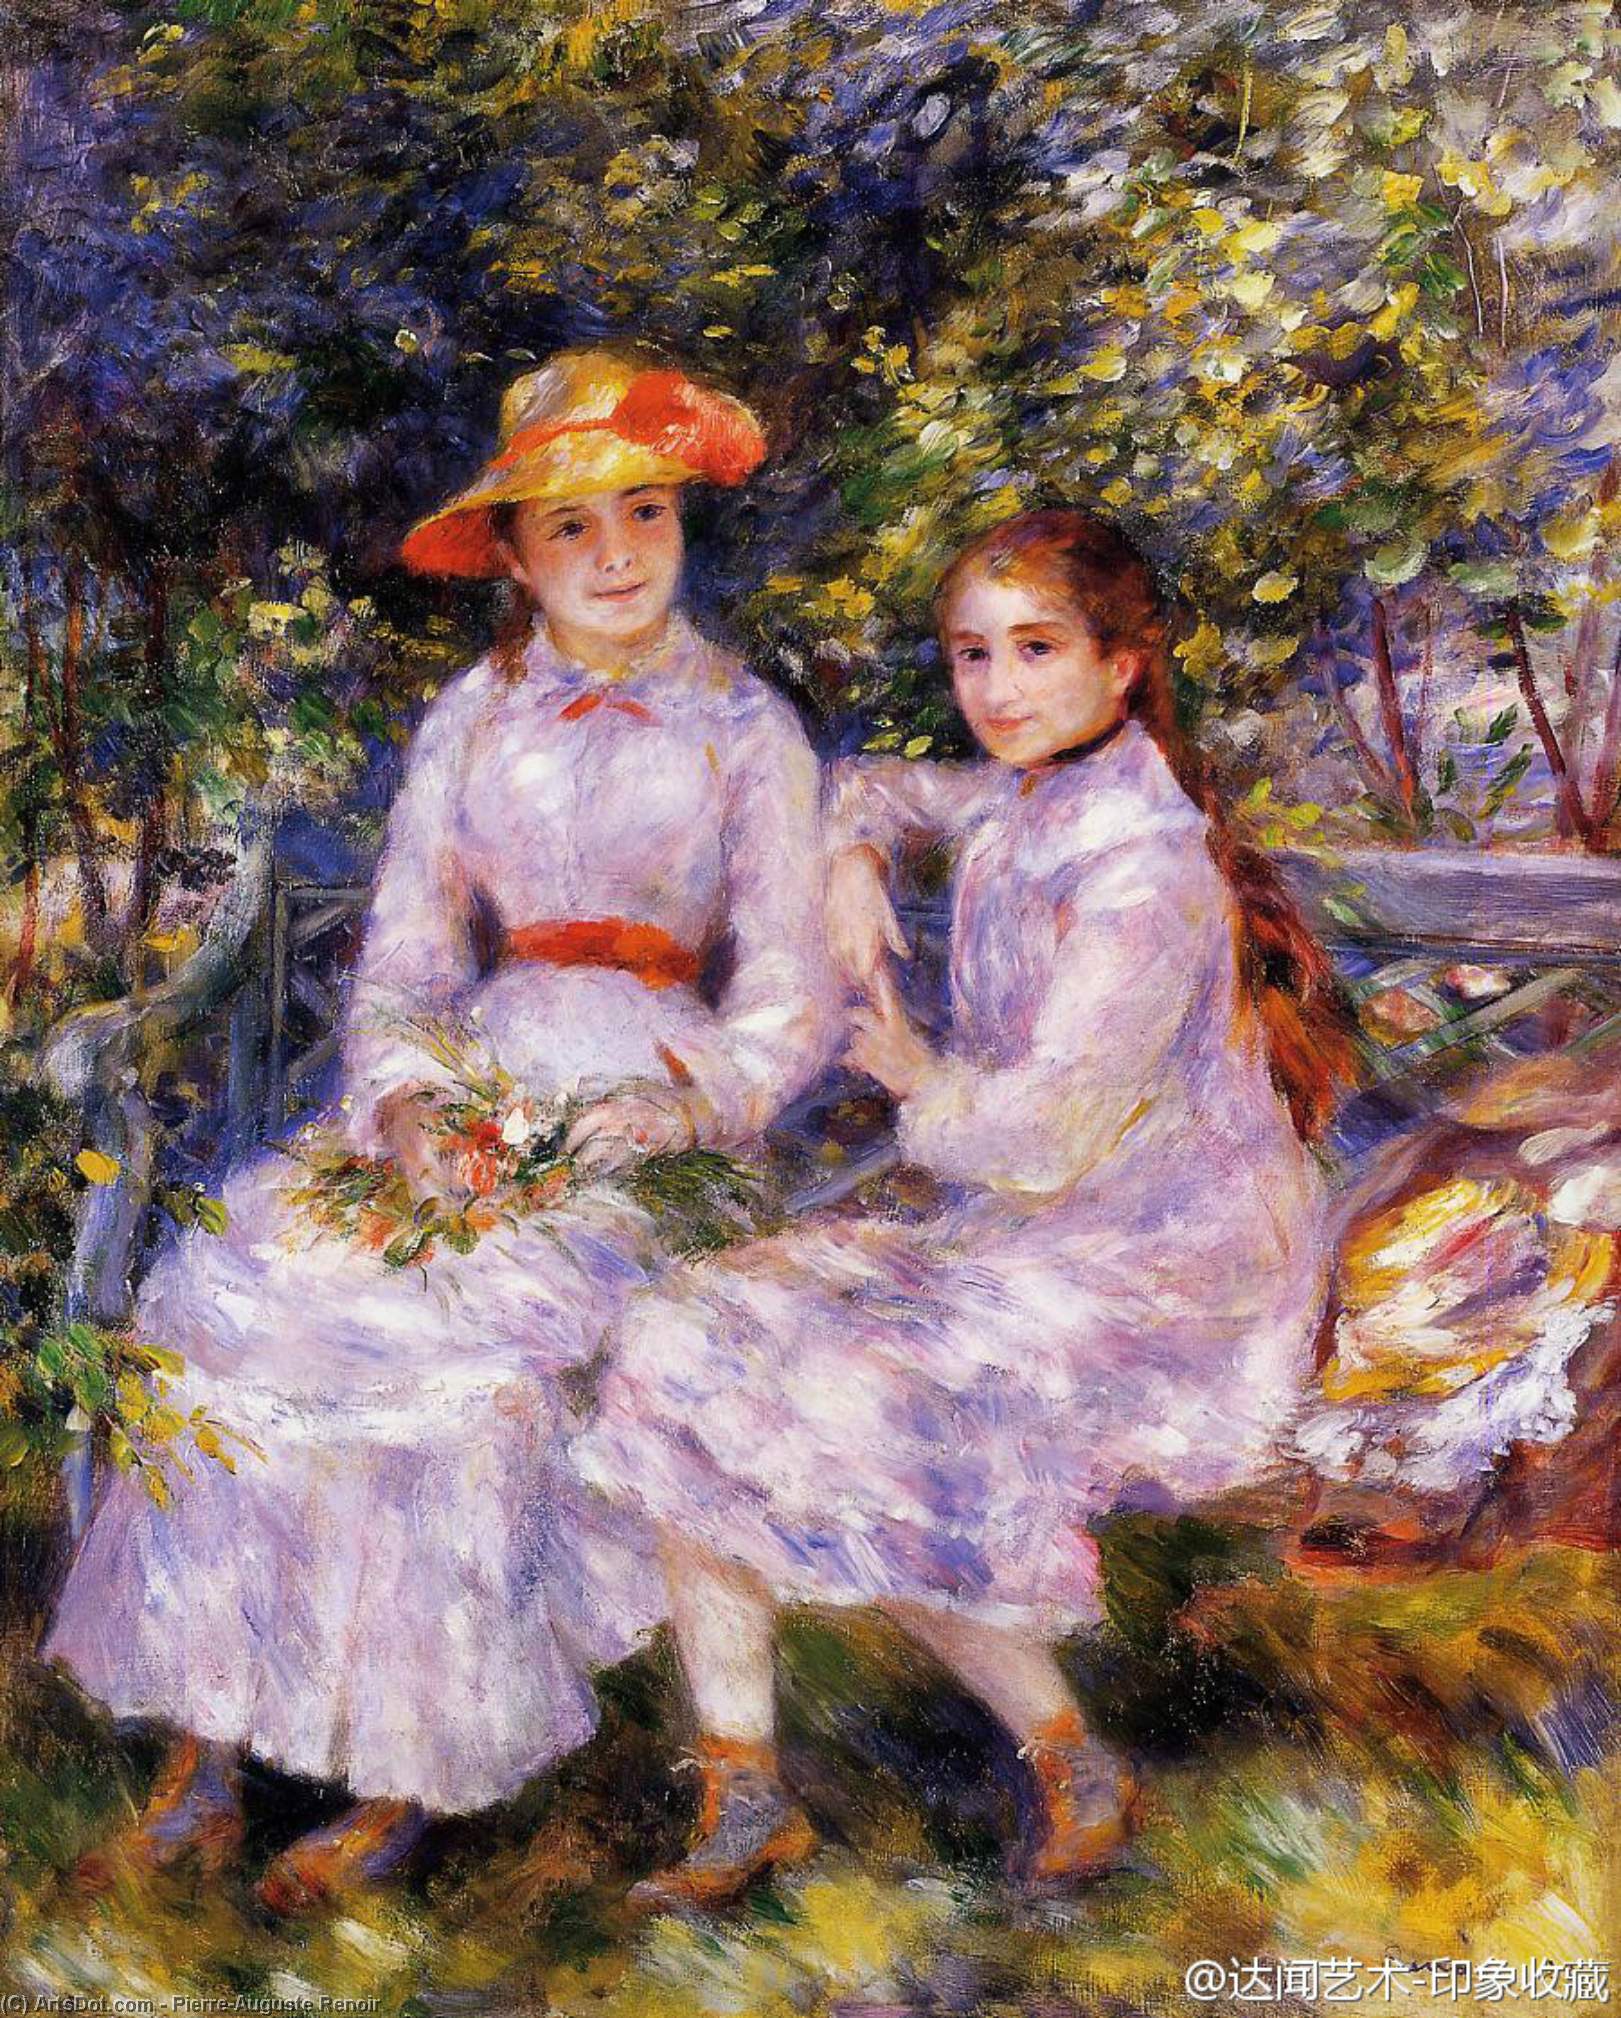 WikiOO.org - Güzel Sanatlar Ansiklopedisi - Resim, Resimler Pierre-Auguste Renoir - The Daughters of Paul Durand-Ruel (also known as Marie-Theresa and Jeanne)